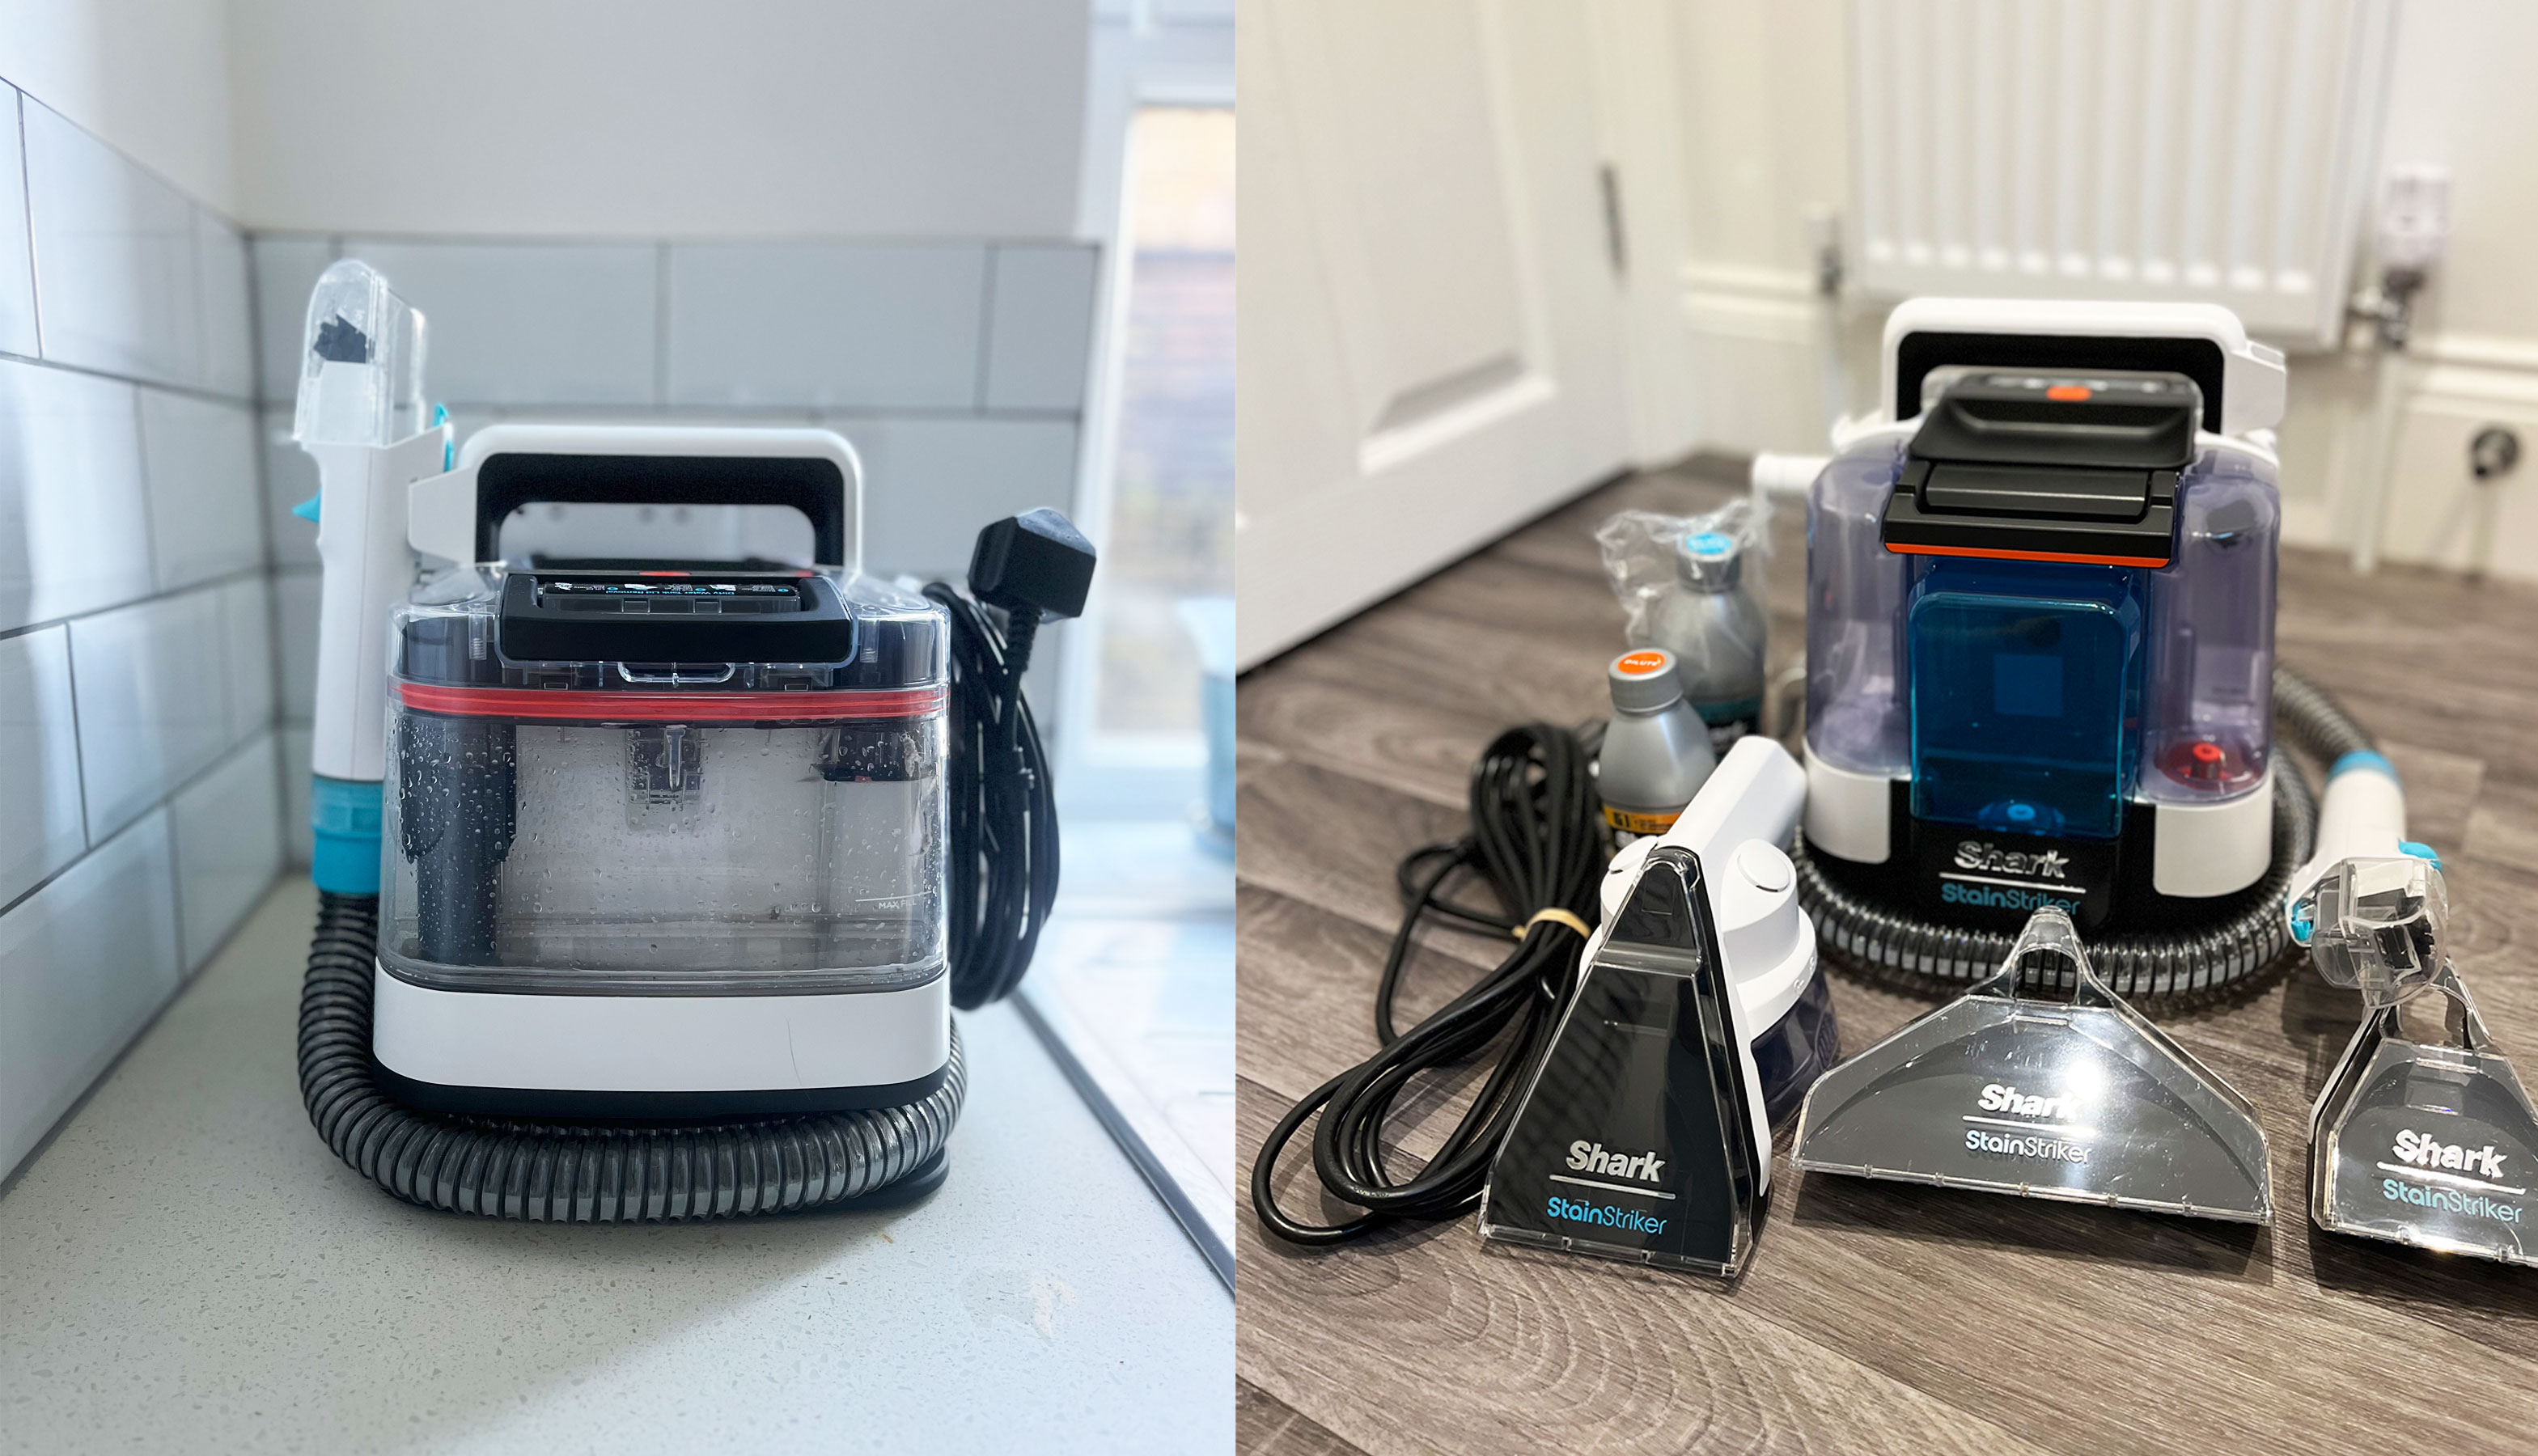 Review: This Shark Carpet Cleaner Made My Dirty Rug Look Brand New